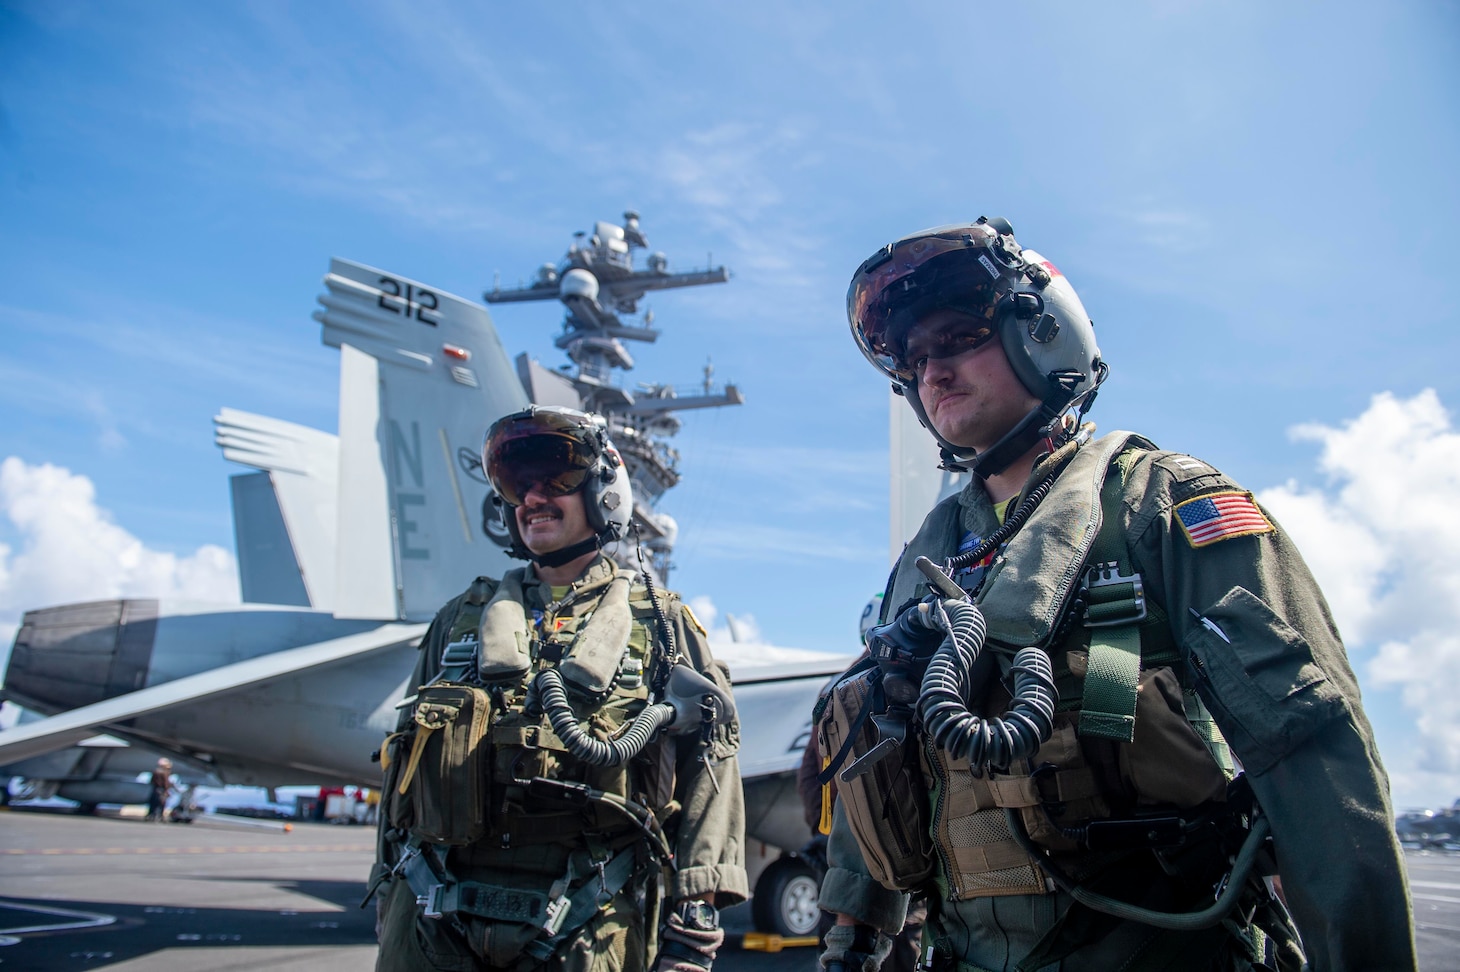 PACIFIC OCEAN (Aug. 26, 2021) Pilots prepare to enter an F/A-18F Super Hornet assigned to the “Bounty Hunters” of Strike Fighter Squadron (VFA) 2, on the flight deck aboard Nimitz-class aircraft carrier USS Carl Vinson (CVN 70), Aug. 26, 2021. Carl Vinson Carrier Strike Group is on a rotational deployment in the U.S. 7th Fleet area of operations to enhance interoperability with allies and partners, and to serve as a ready-response force in support of a free and open Indo-Pacific region. (U.S. Navy photo by Mass Communication Specialist Seaman Isaiah Williams)